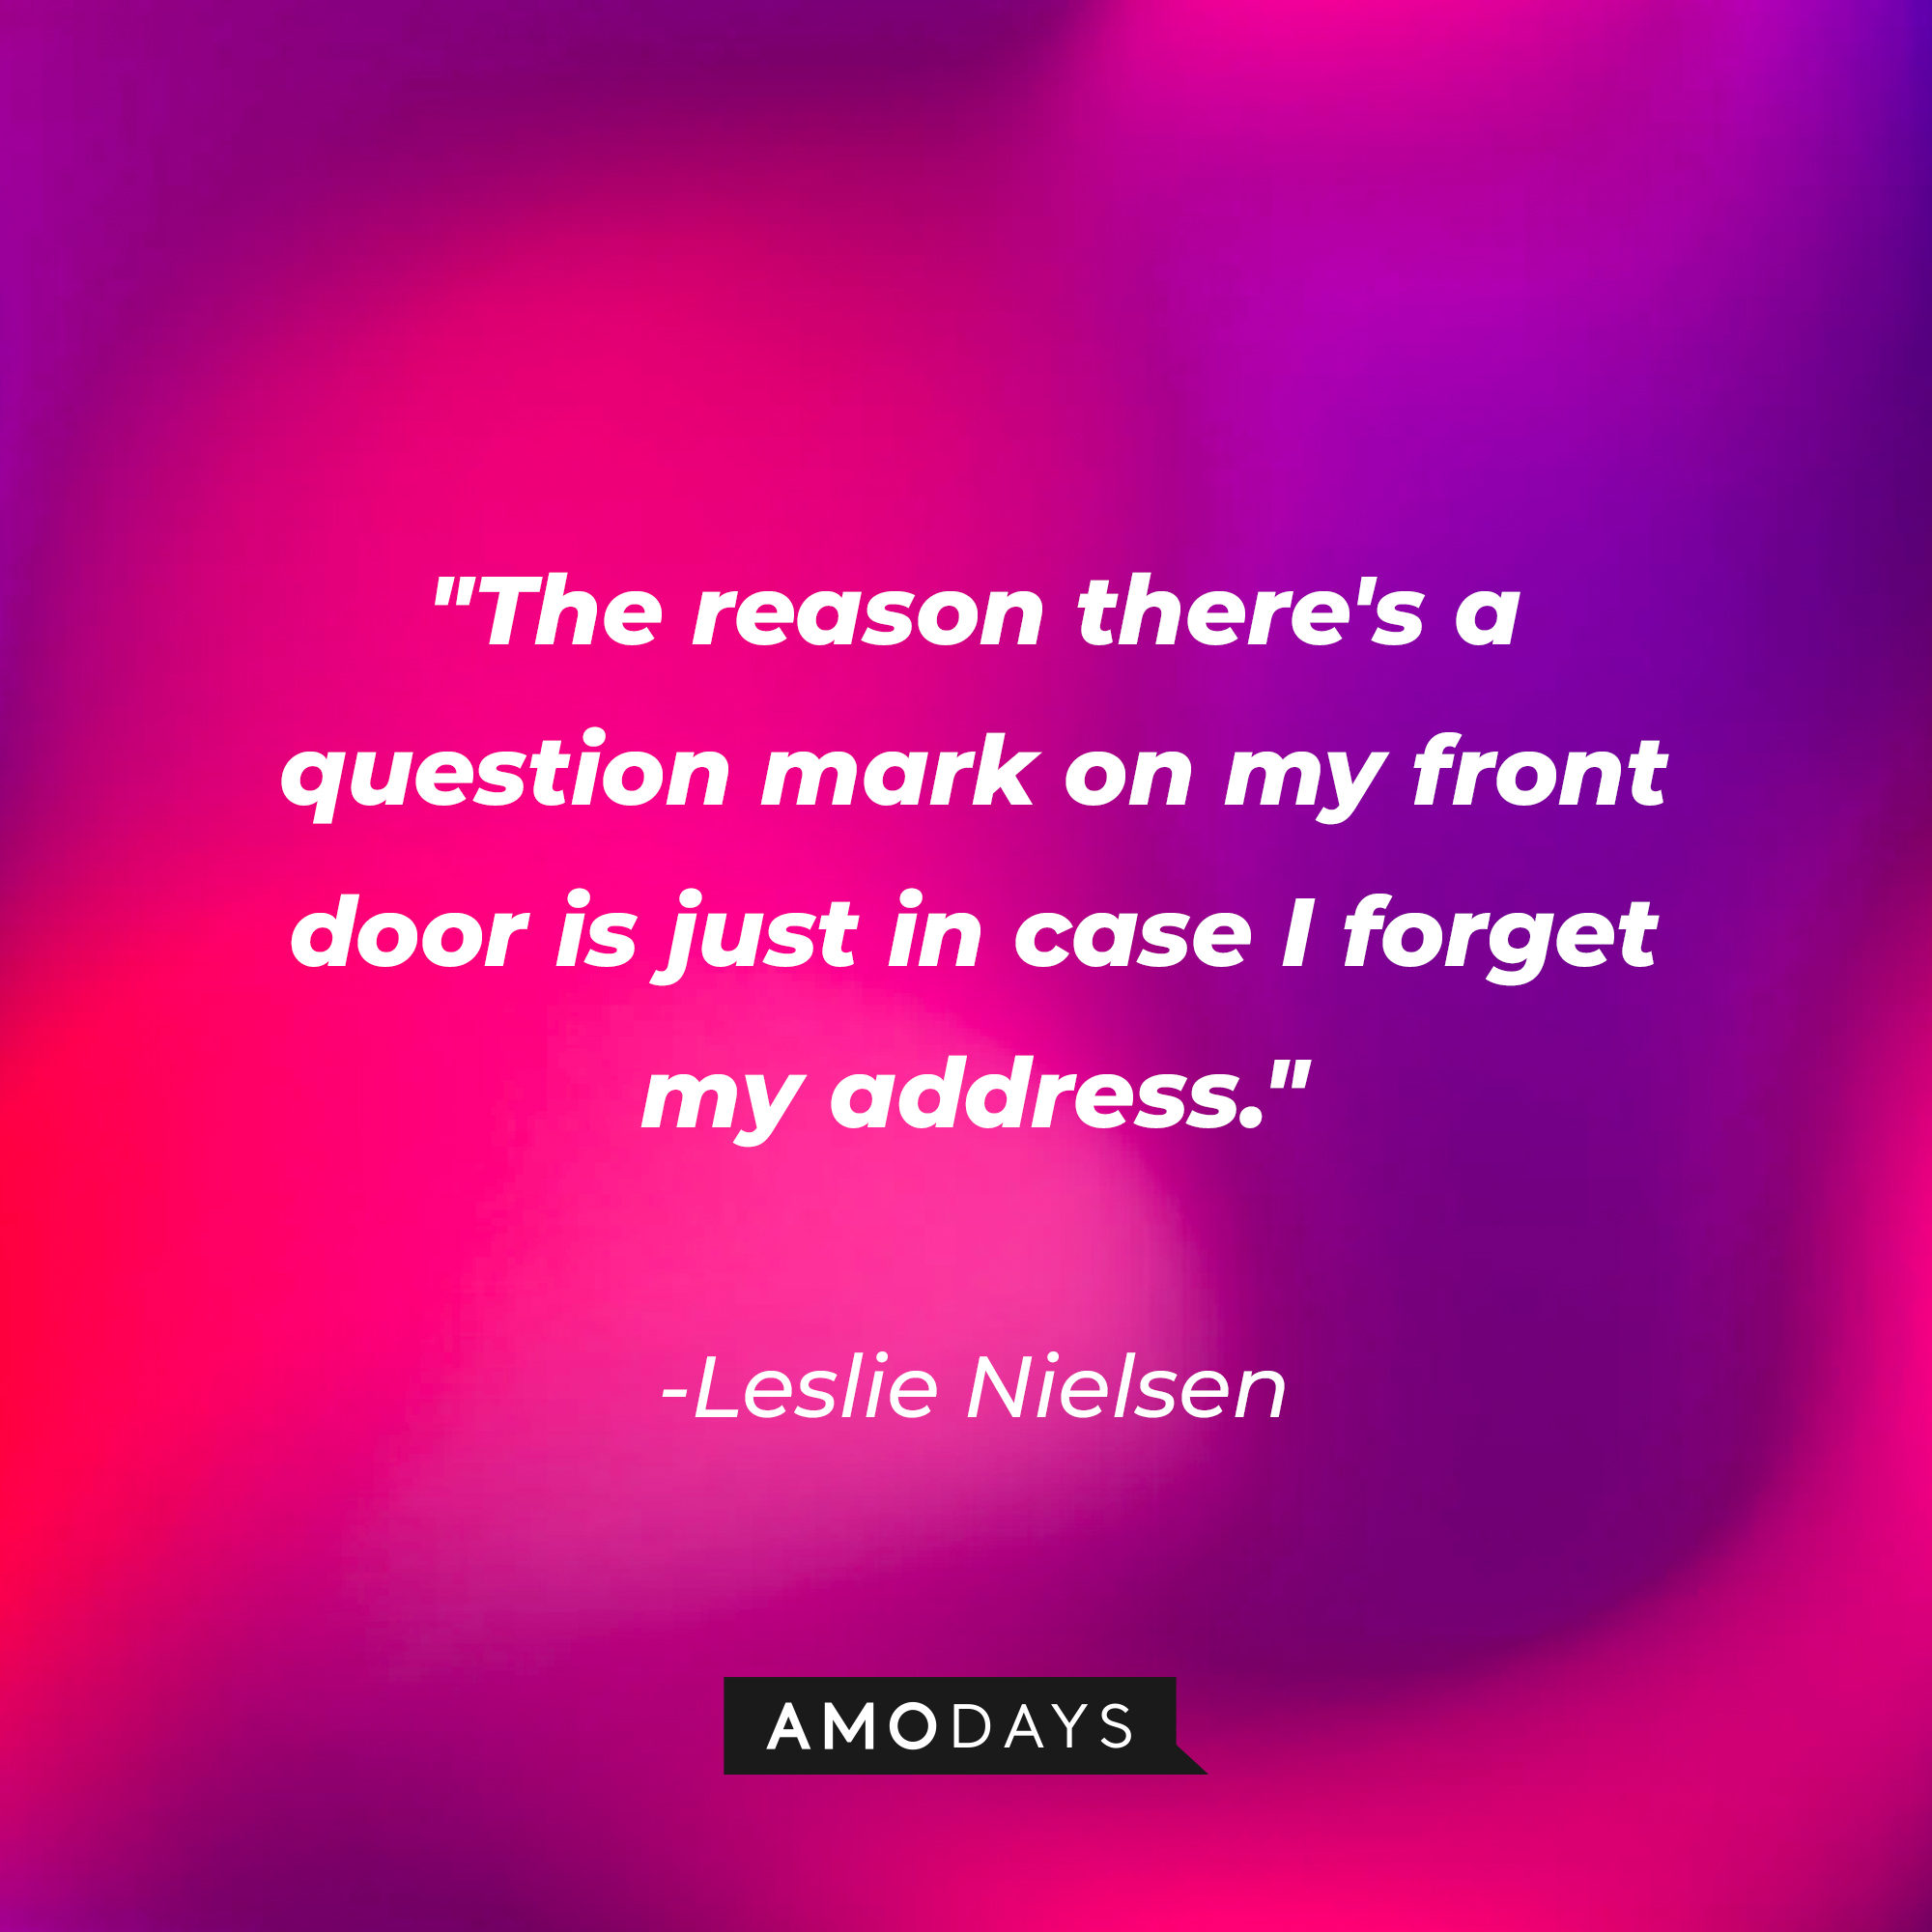 Leslie Nielsen's quote: "The reason there's a question mark on my front door is just in case I forget my address." | Source: Amodays